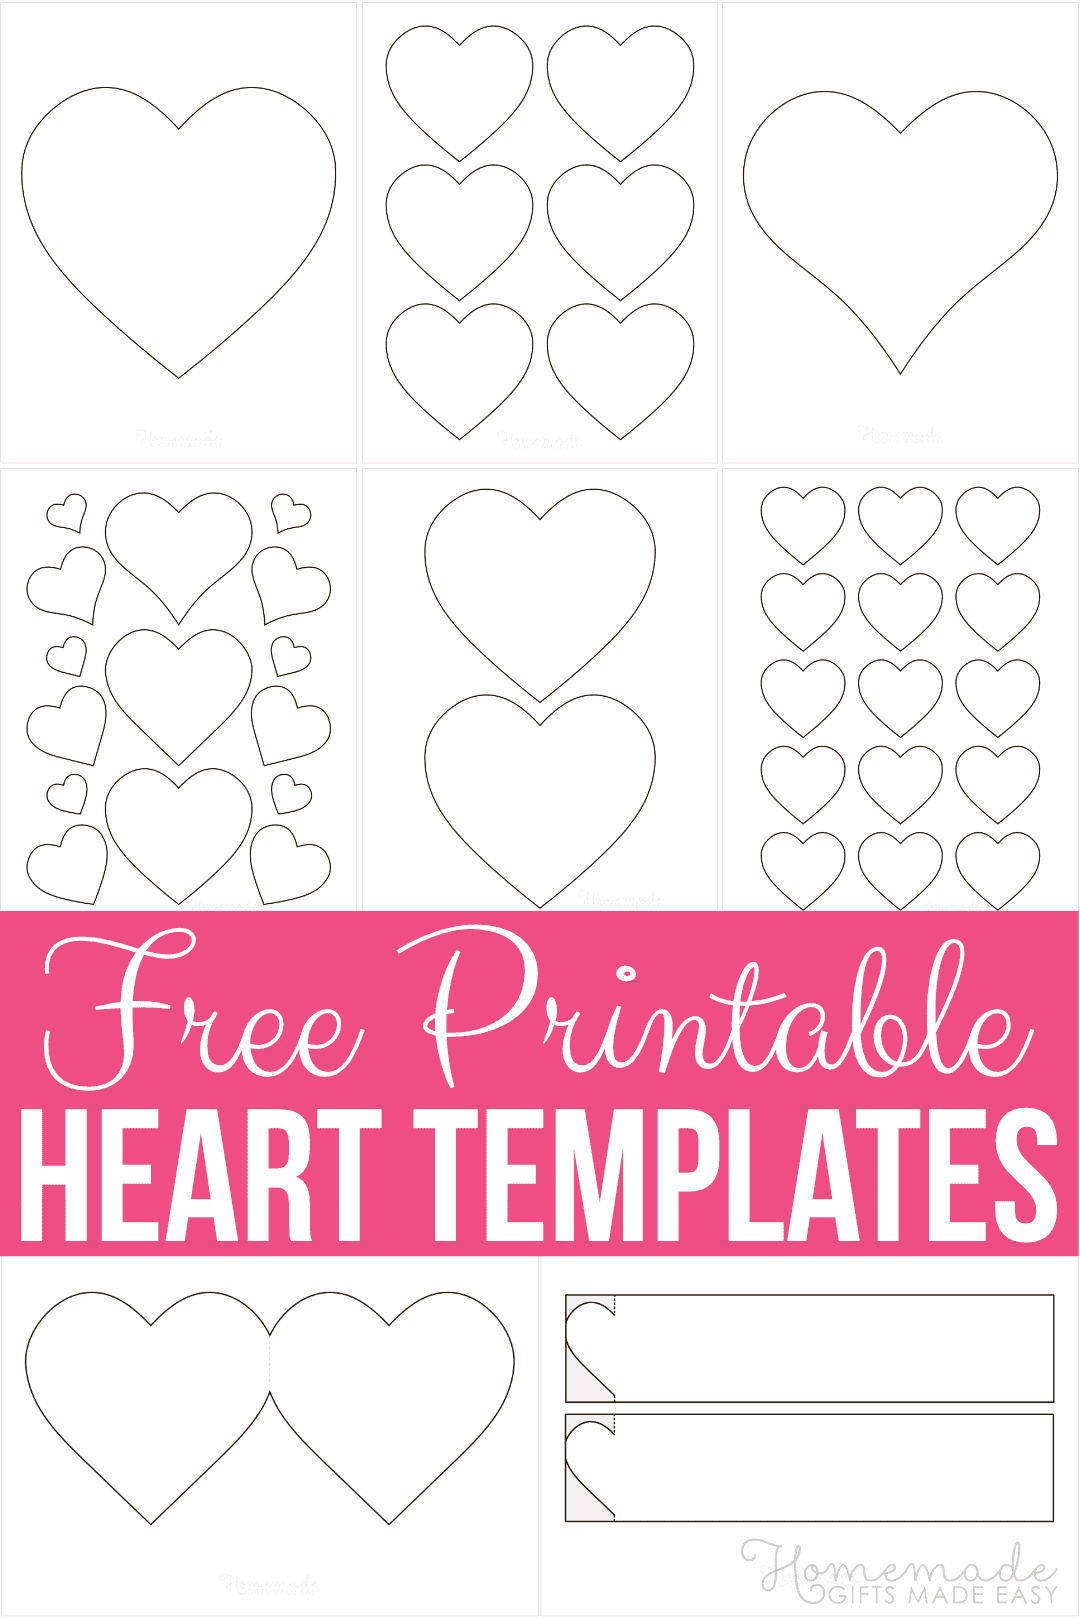 20 Free Printable Heart Templates, Patterns &